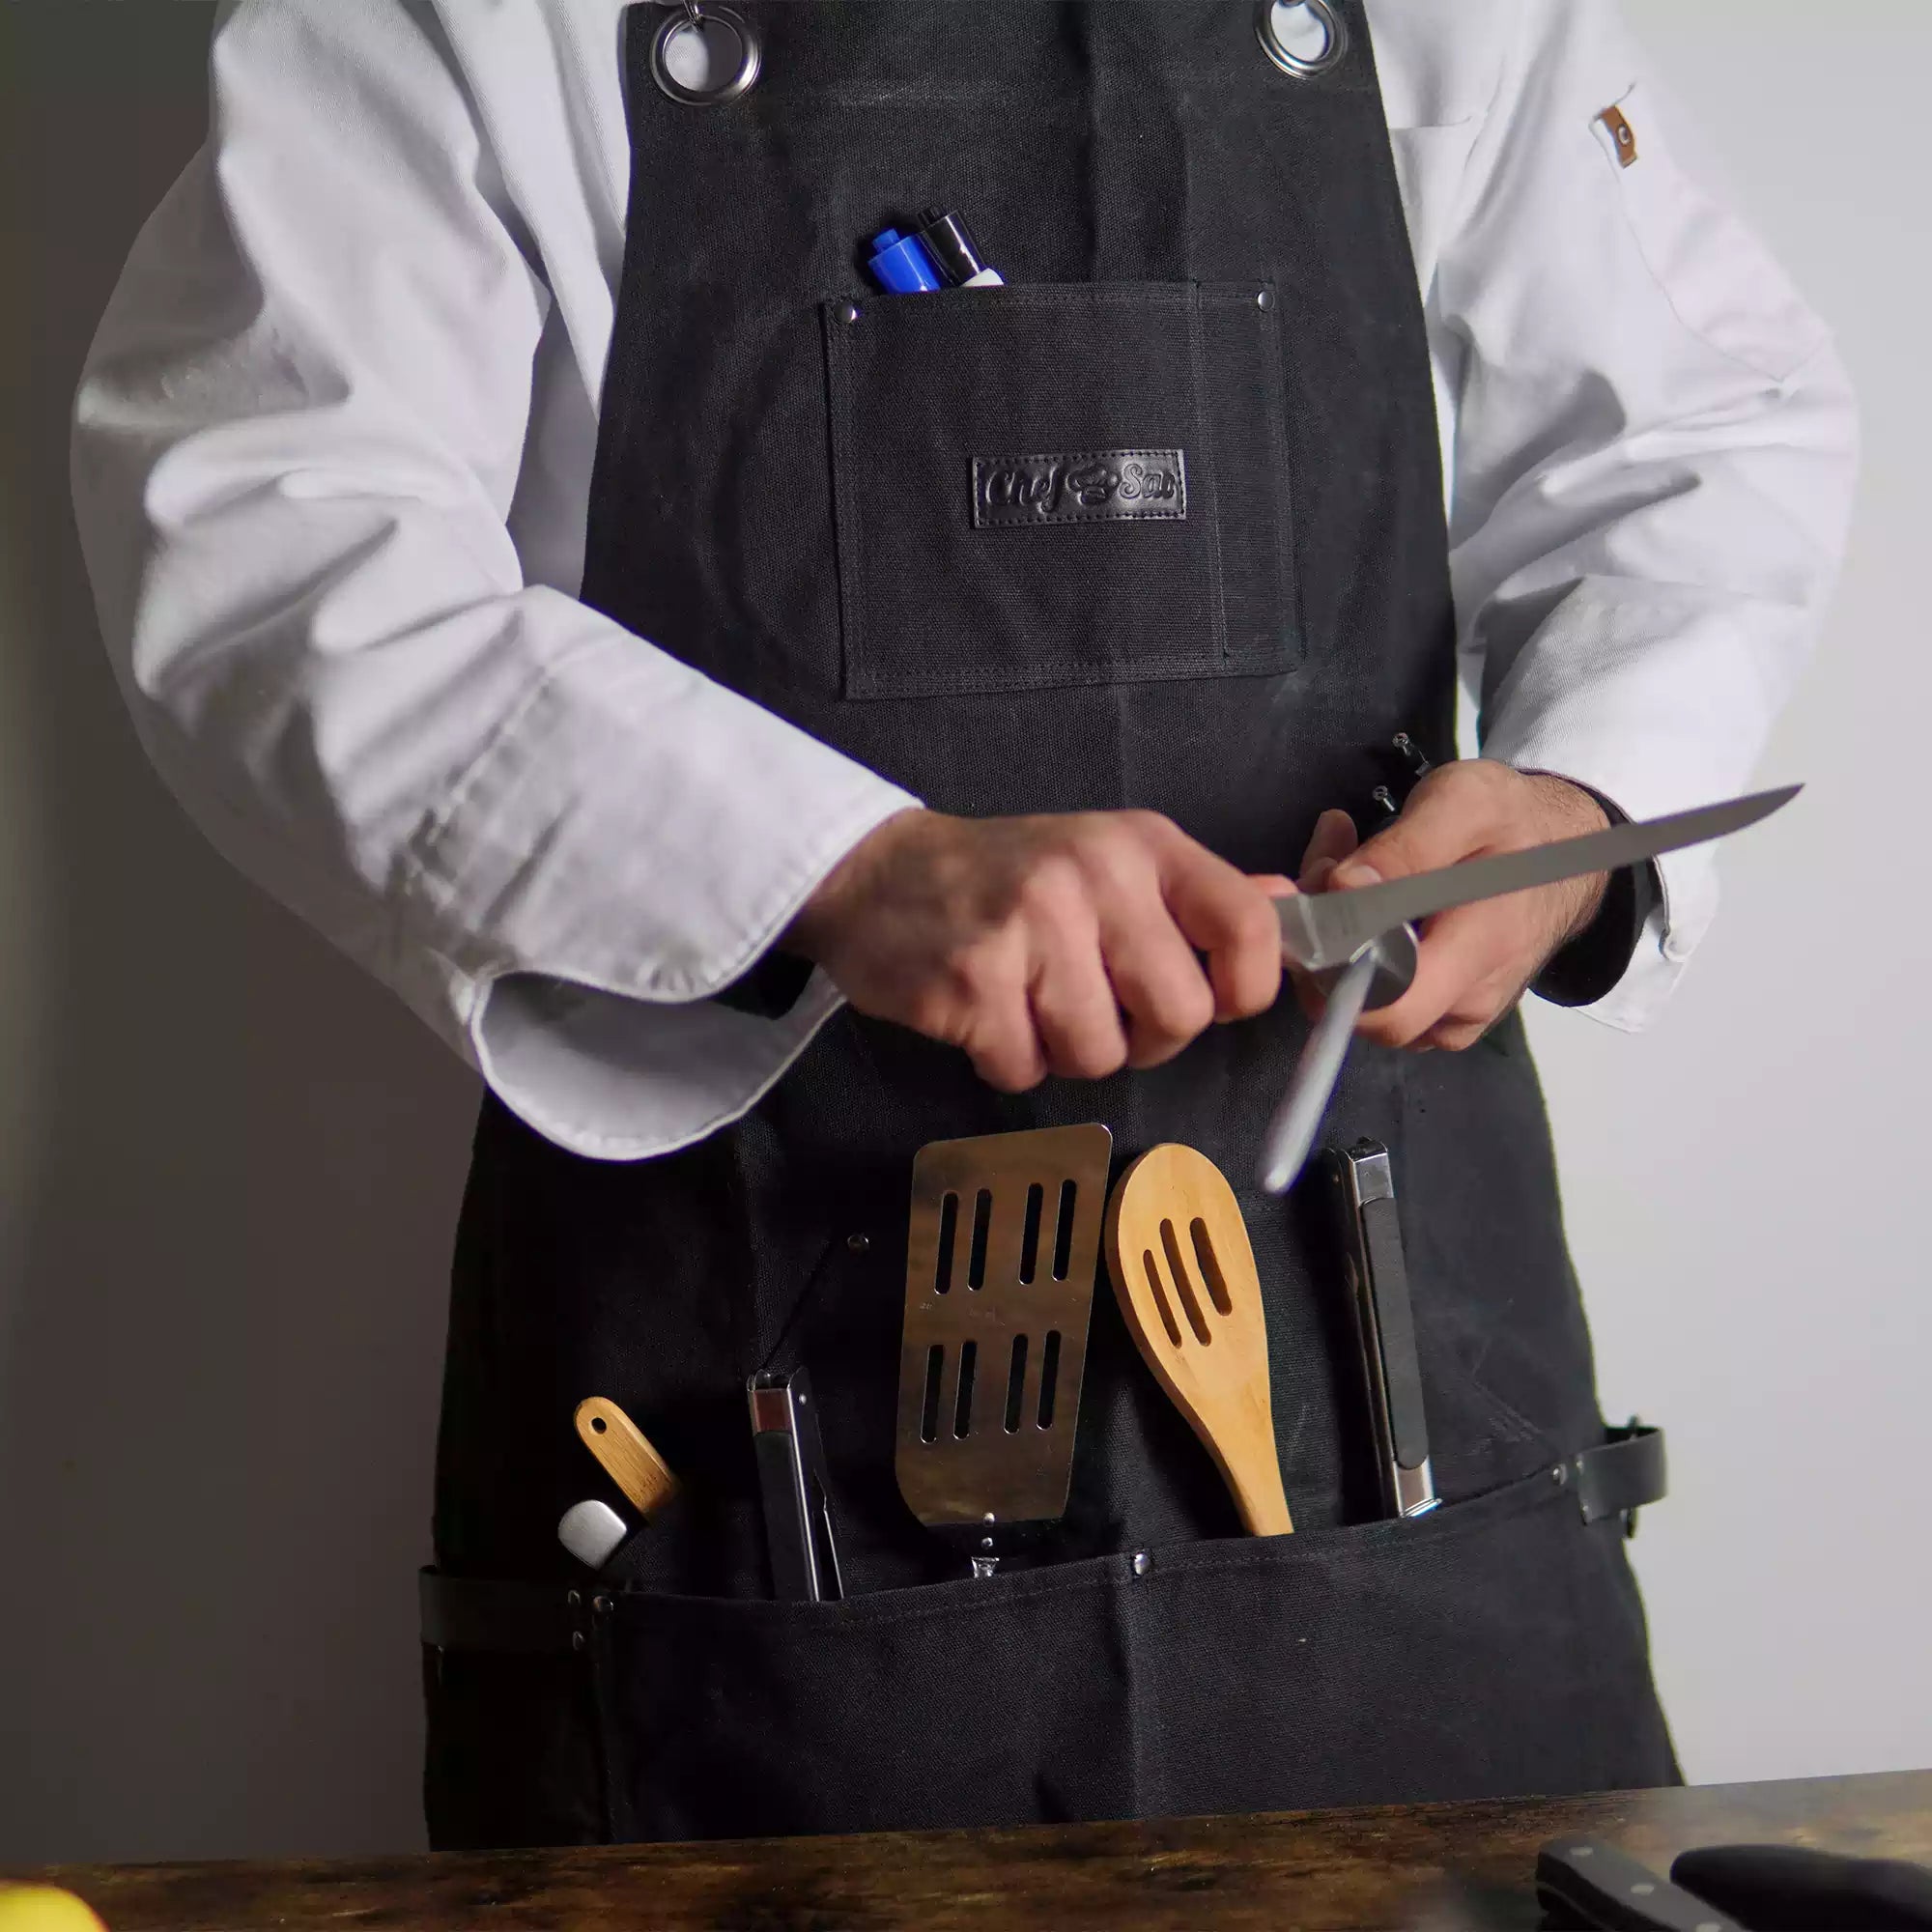 Waxed Canvas Basic Chef Knife Roll by Chef Sac